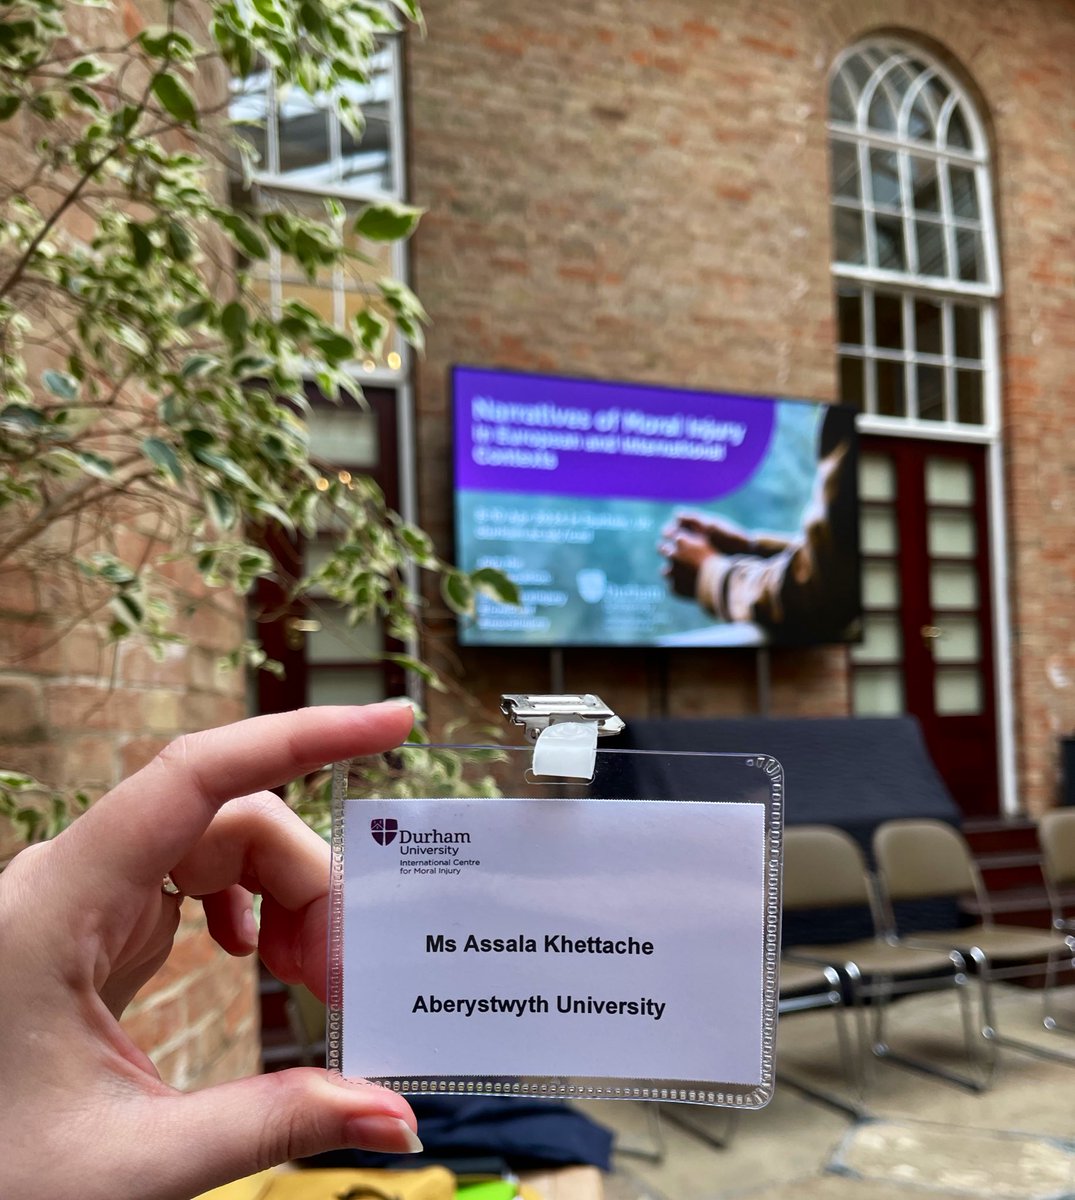 I am so honoured to present my research on the weaponization of collective moral injuries in African societies. Thank you @ic_moralinjury for an exceptional conference! @durham_uni @InterpolAber